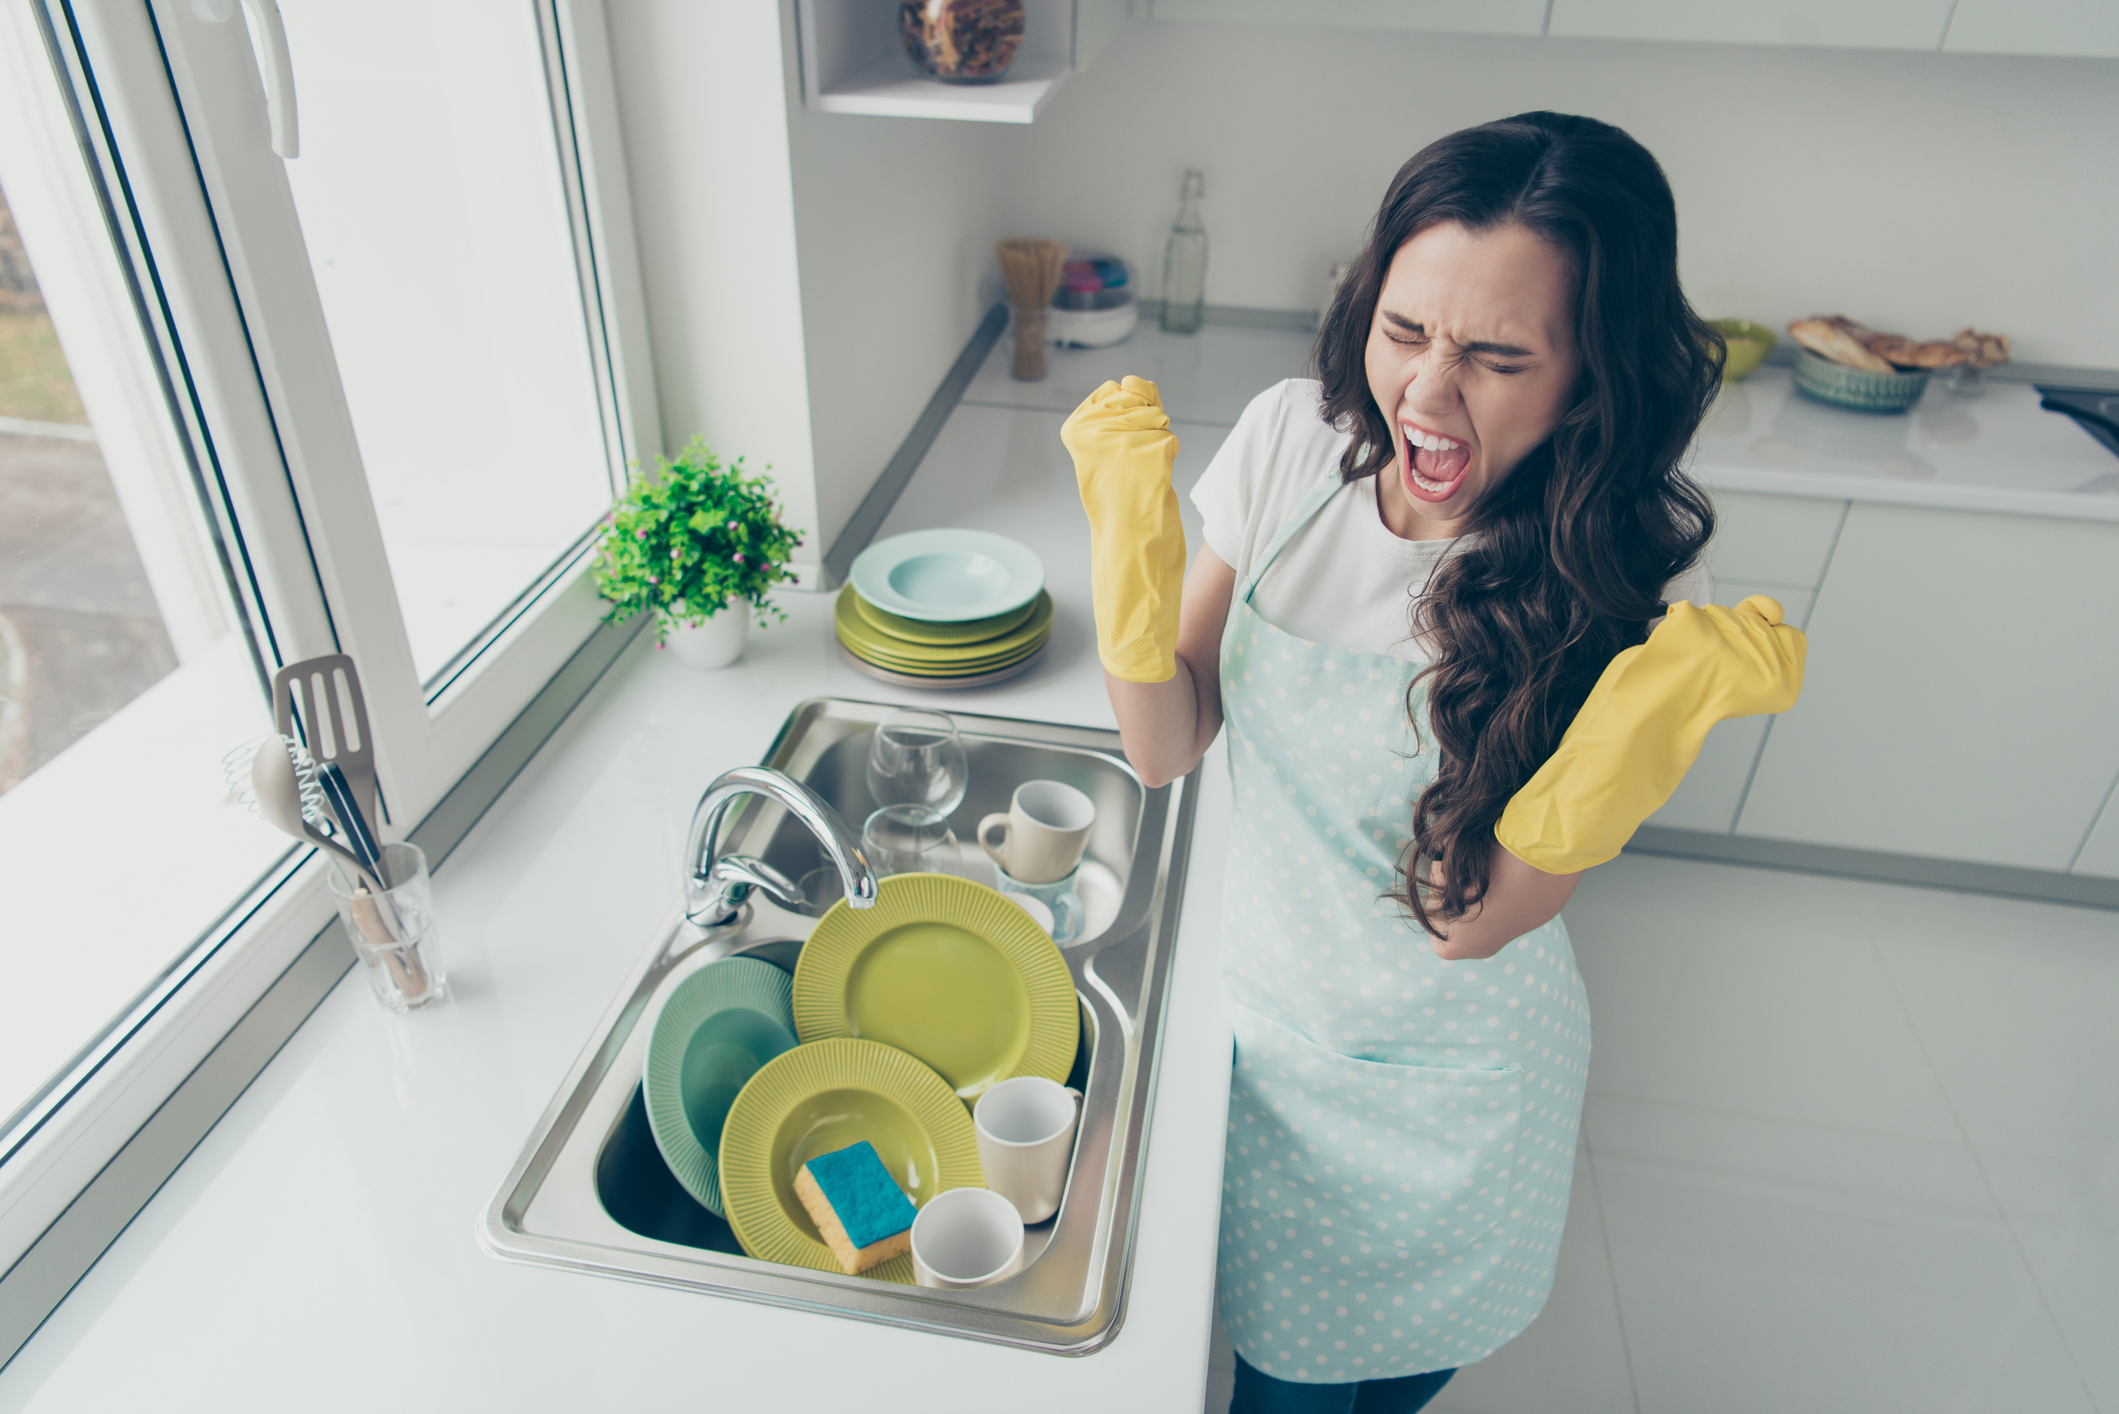 Internet hard relates to woman who must first “rage clean” before all else